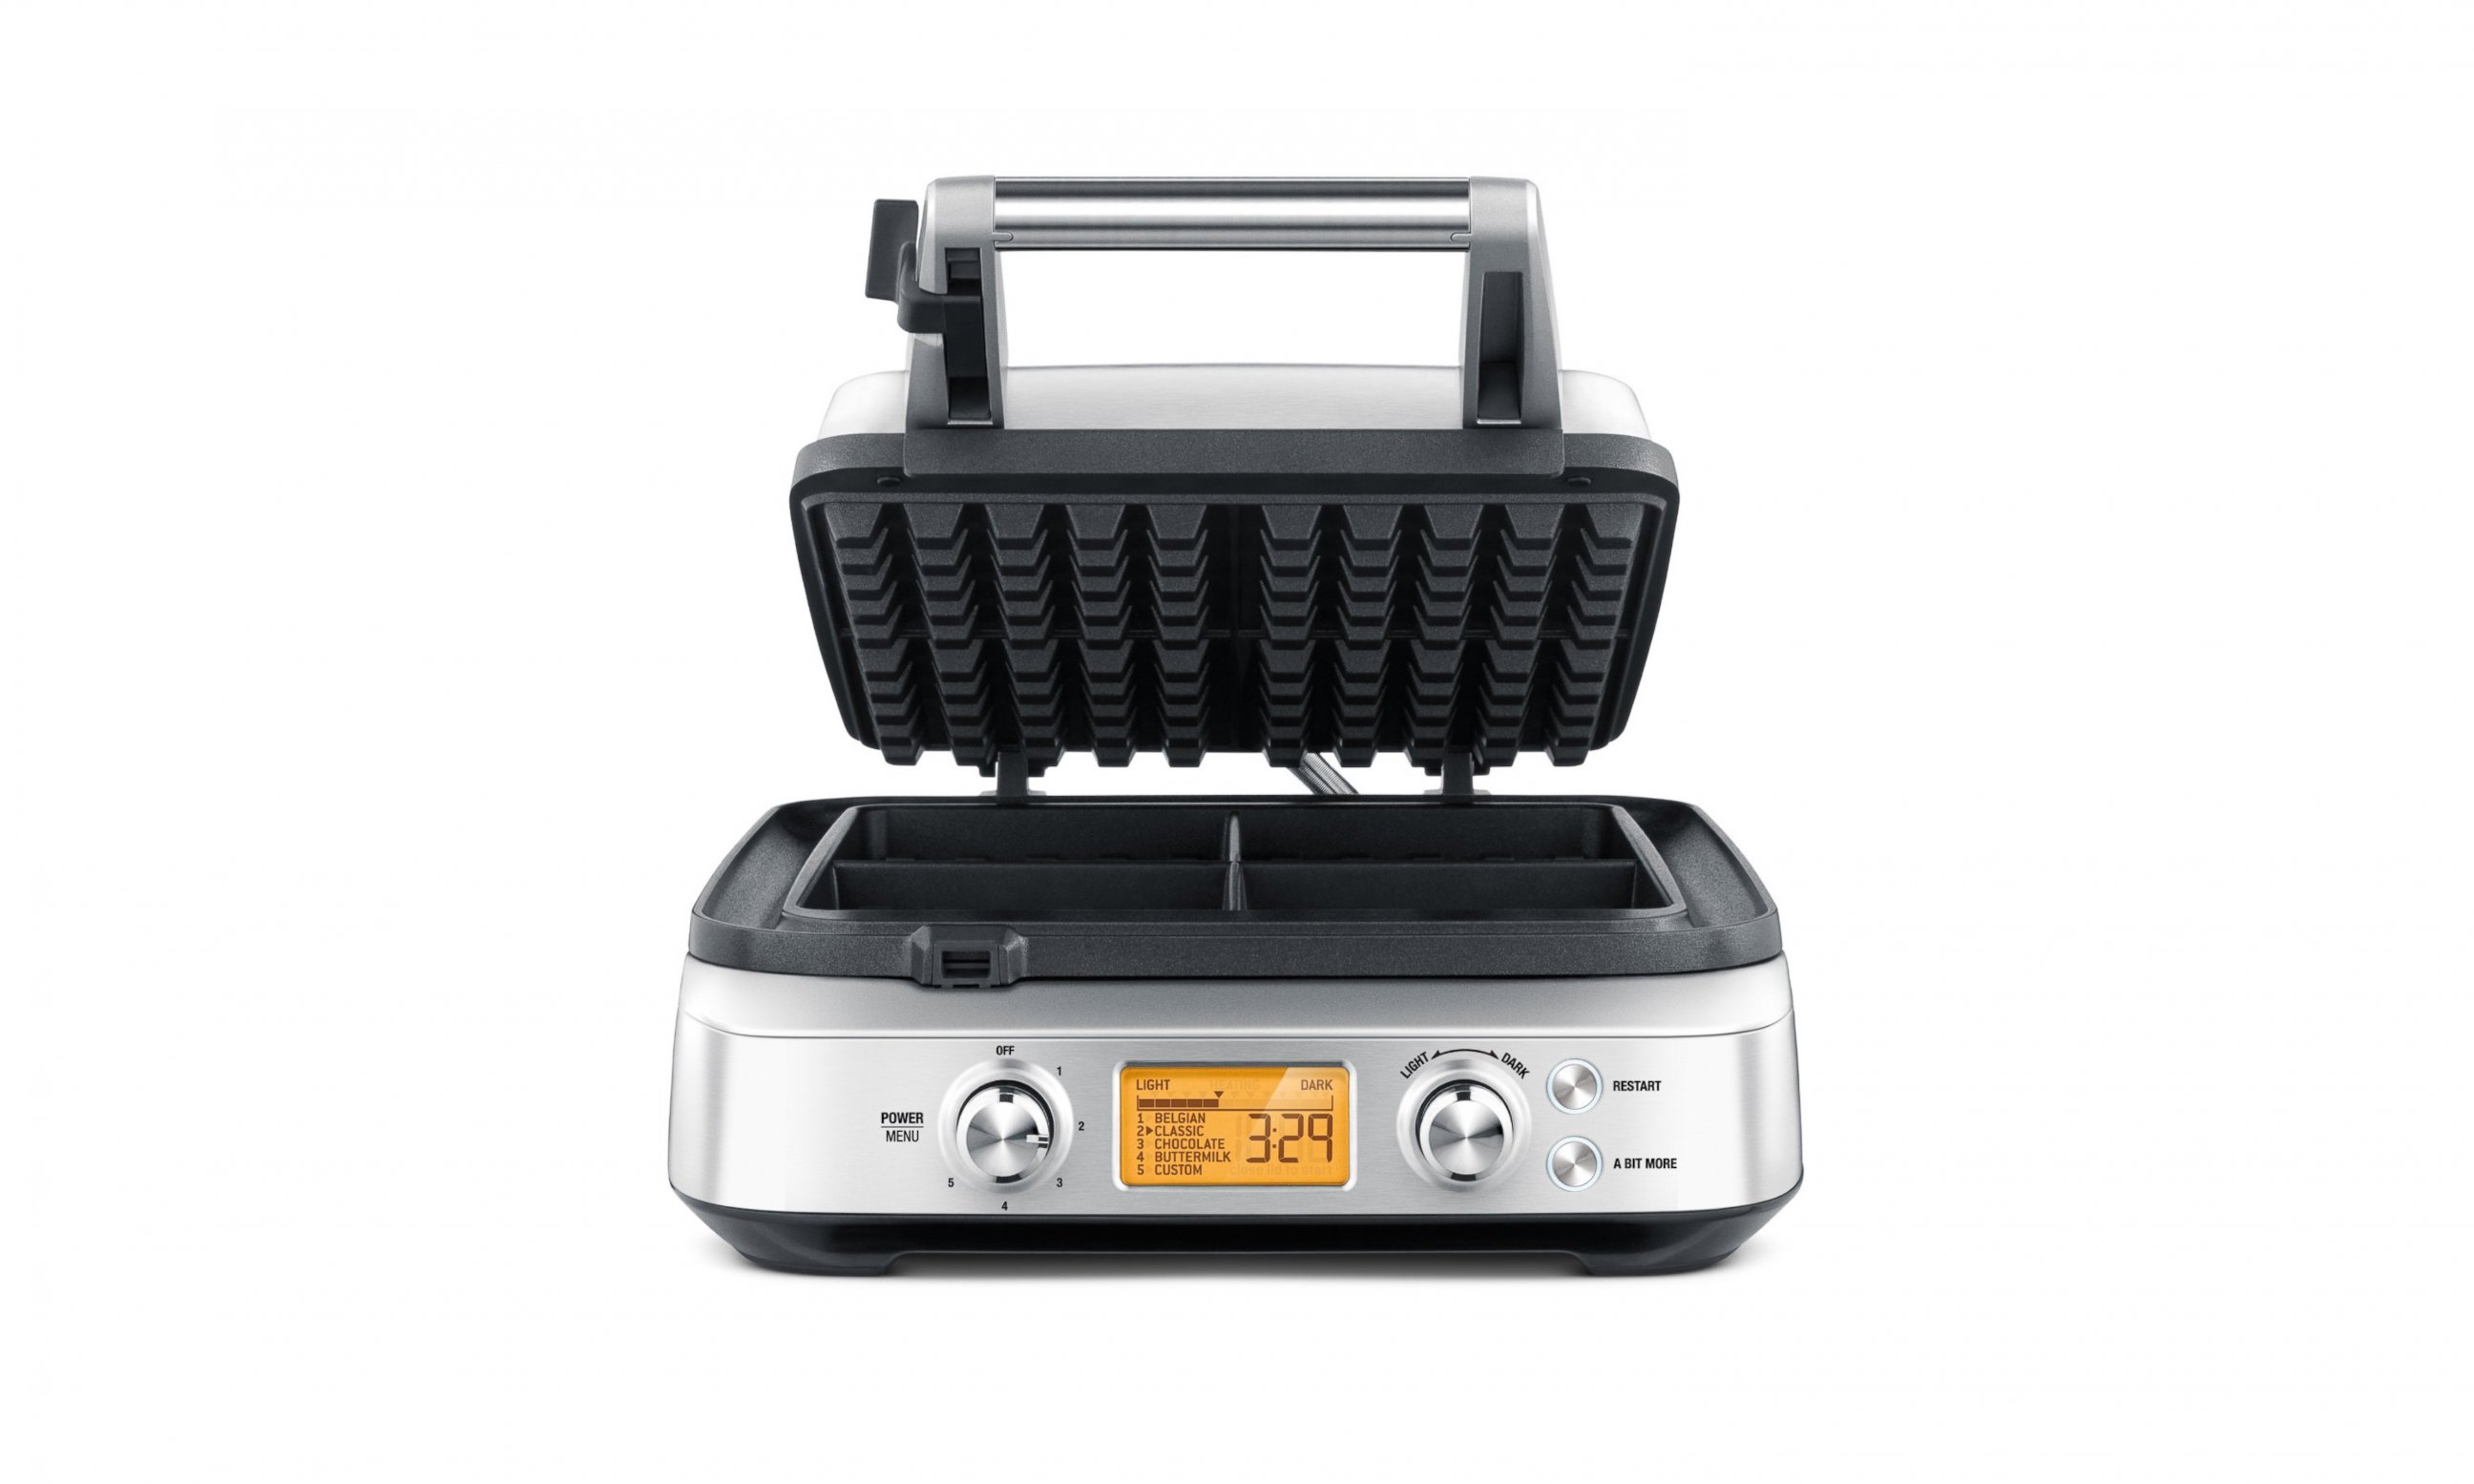 PHOTO: The Breville Smart Waffle Maker is seen in an undated handout image.